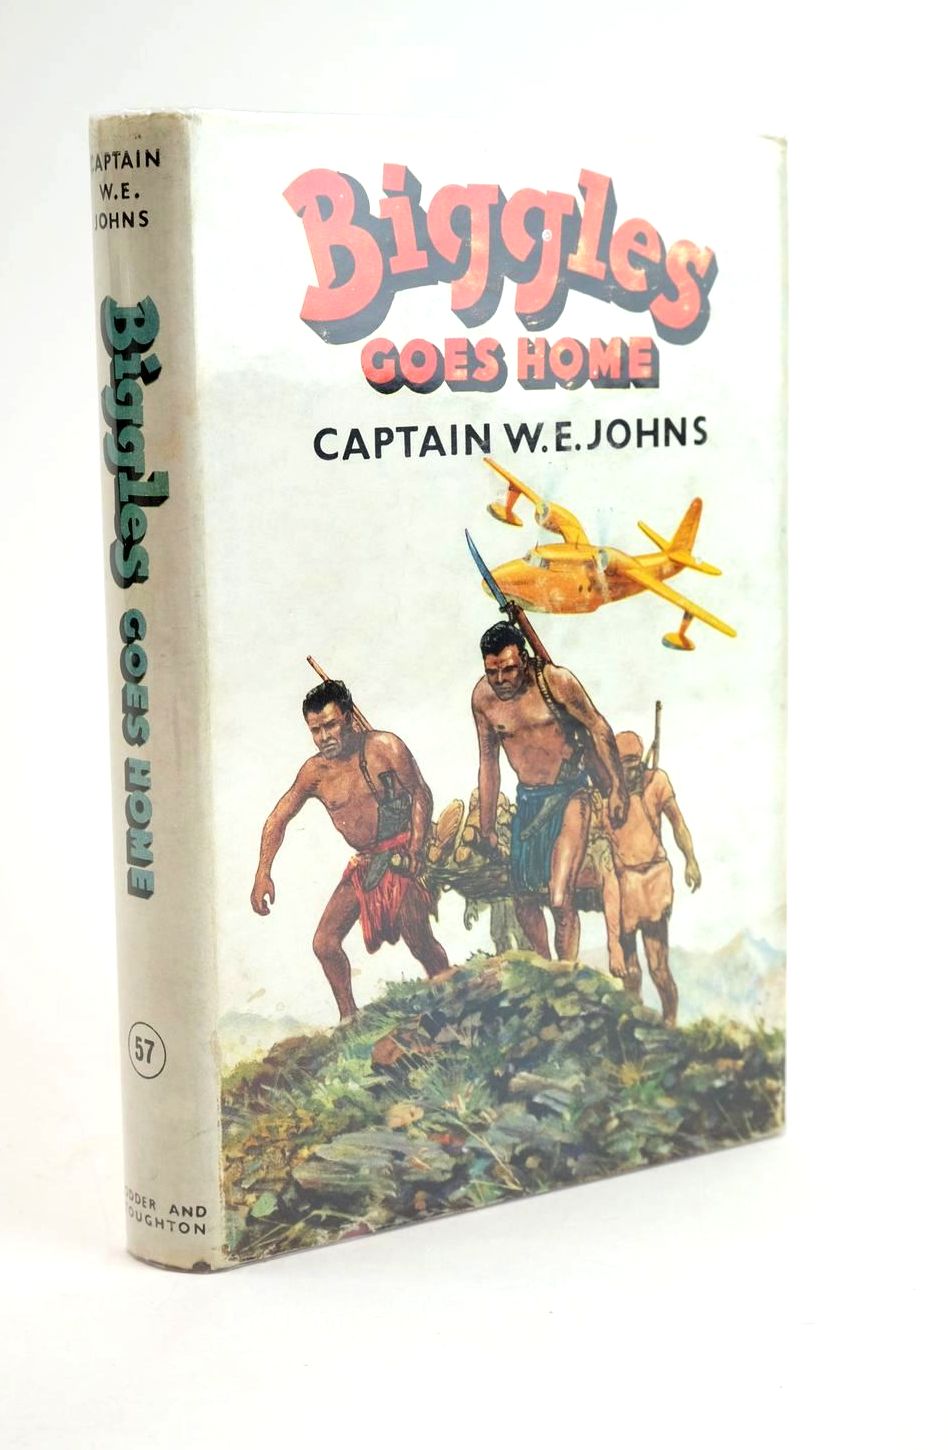 Photo of BIGGLES GOES HOME written by Johns, W.E. illustrated by Stead,  published by Hodder & Stoughton (STOCK CODE: 1323435)  for sale by Stella & Rose's Books